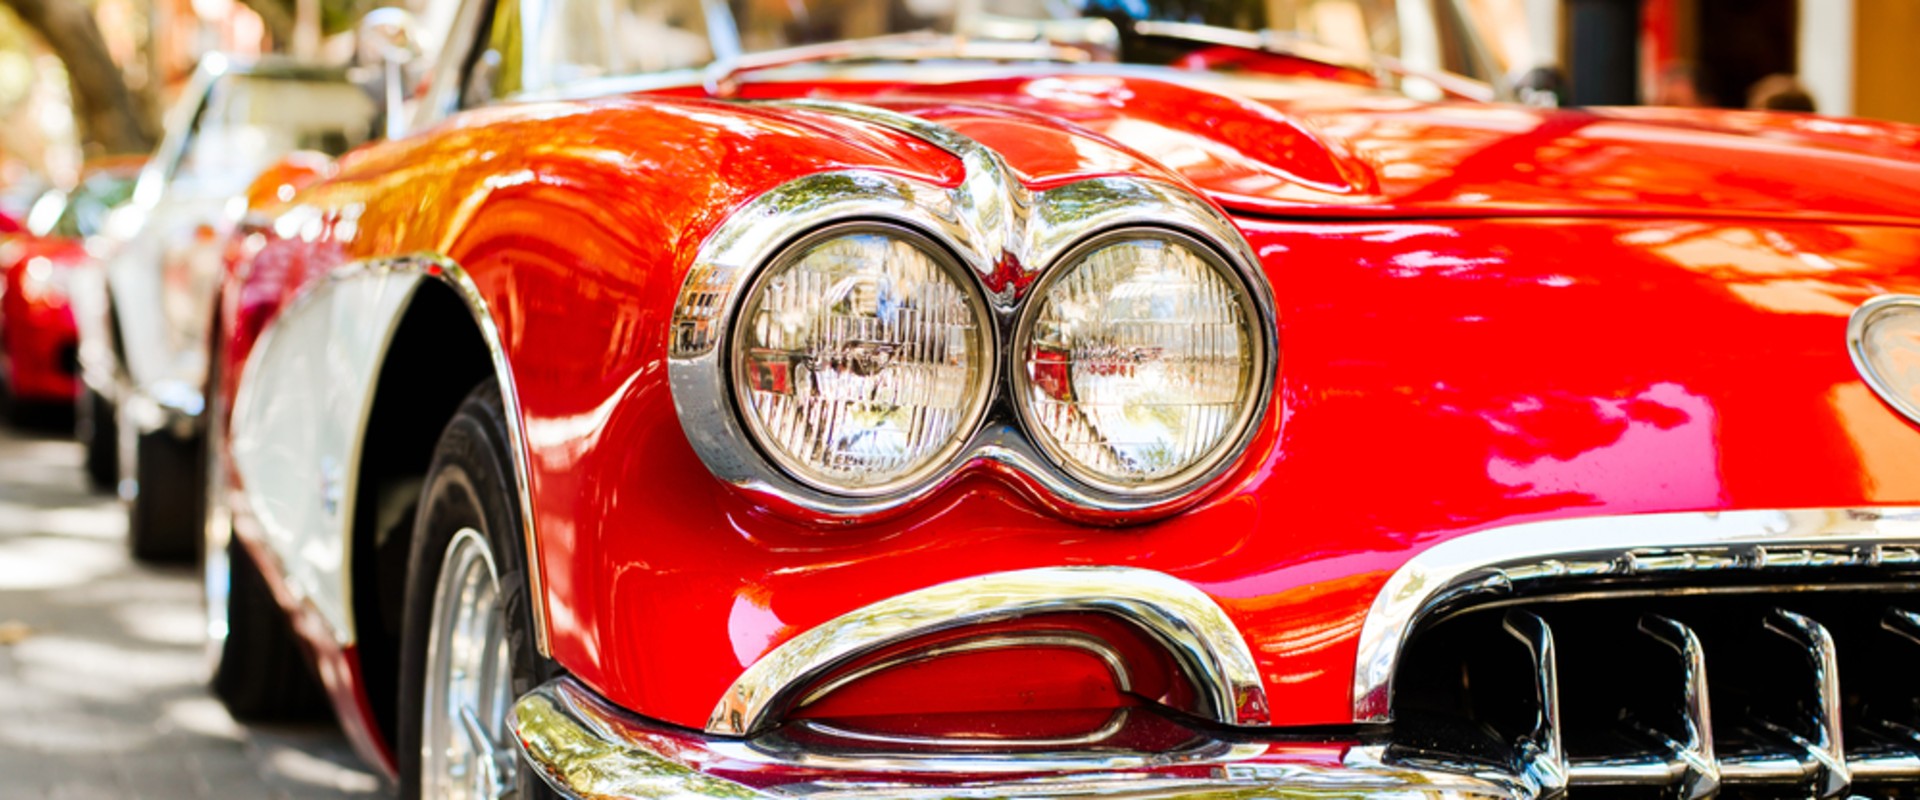 Vintage Car Museums In Central Texas: An Automotive Wonderland